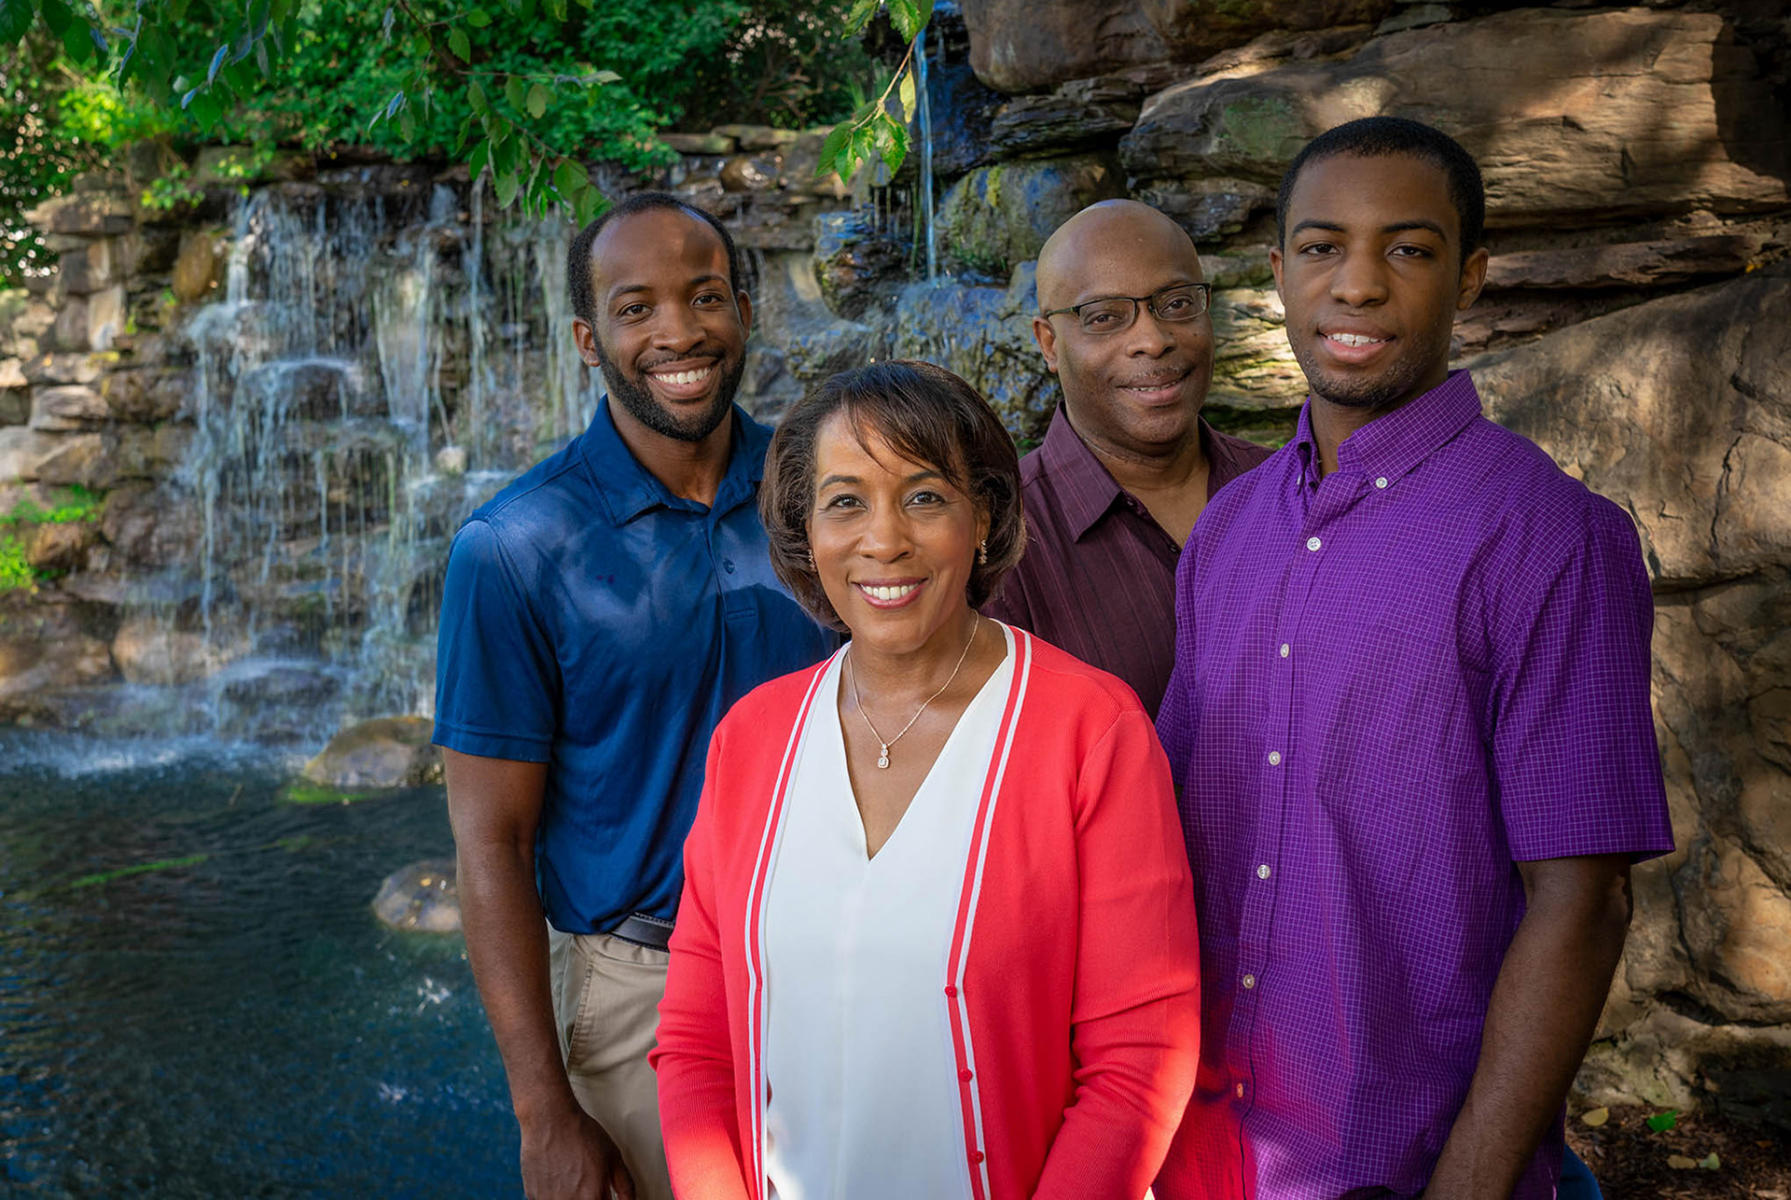 Phyllis Randall, was elected Chair of the Loudon County Board of Supervisors in 2015, becoming the first woman of color in Virginias history to that office. Photographed with her family near her home.

